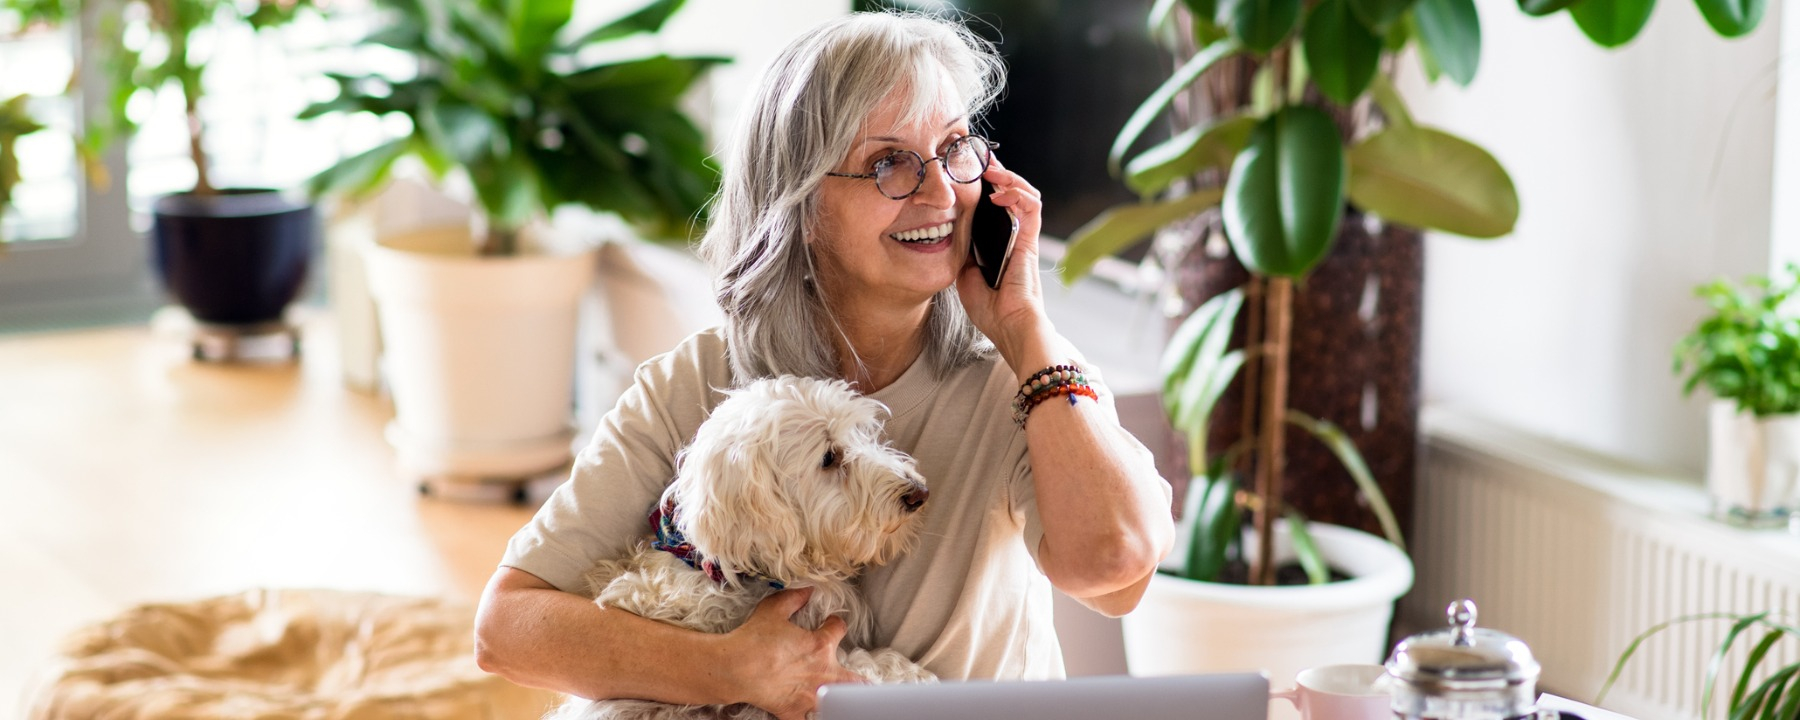 customer experience - mature woman on the phone with paperwork smiling- 1800*720